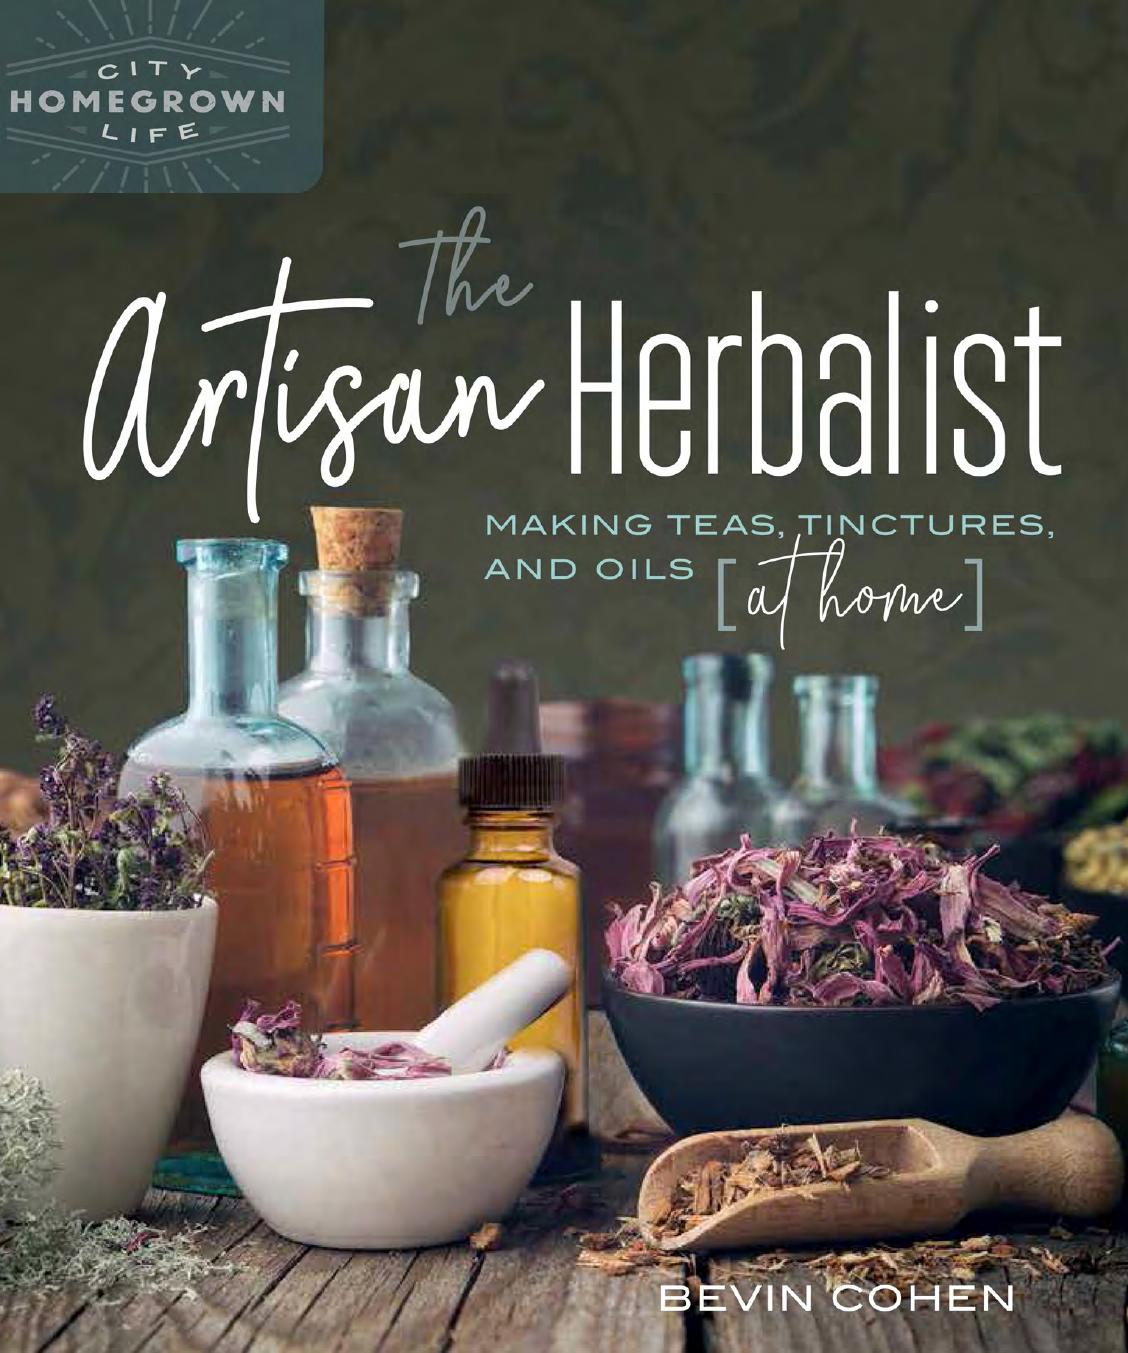 The Artisan Herbalist by Bevin Cohen